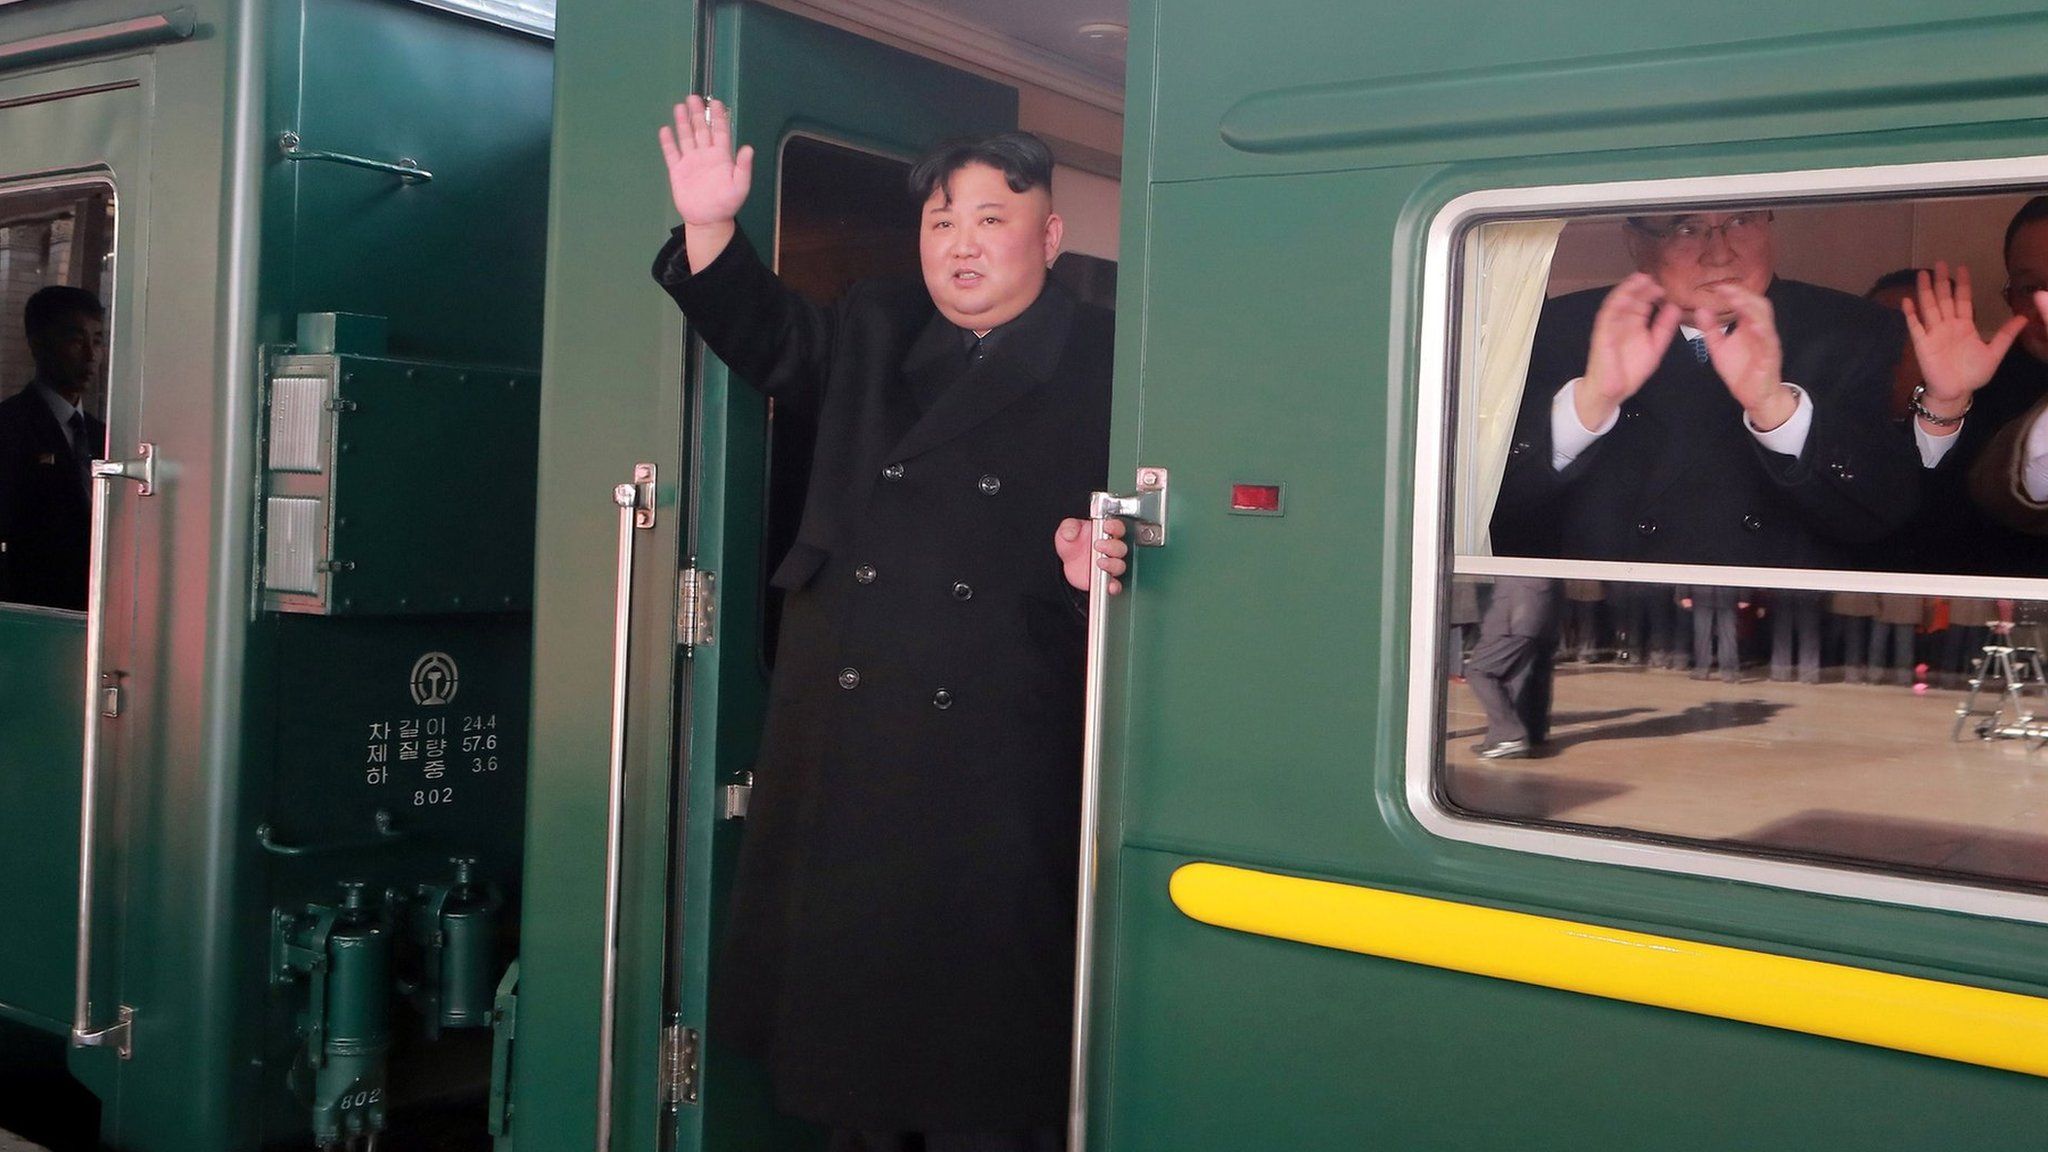 Kim Jong-un waves from train as it leaves Pyongyang - photo released by KCNA news agency 23 February